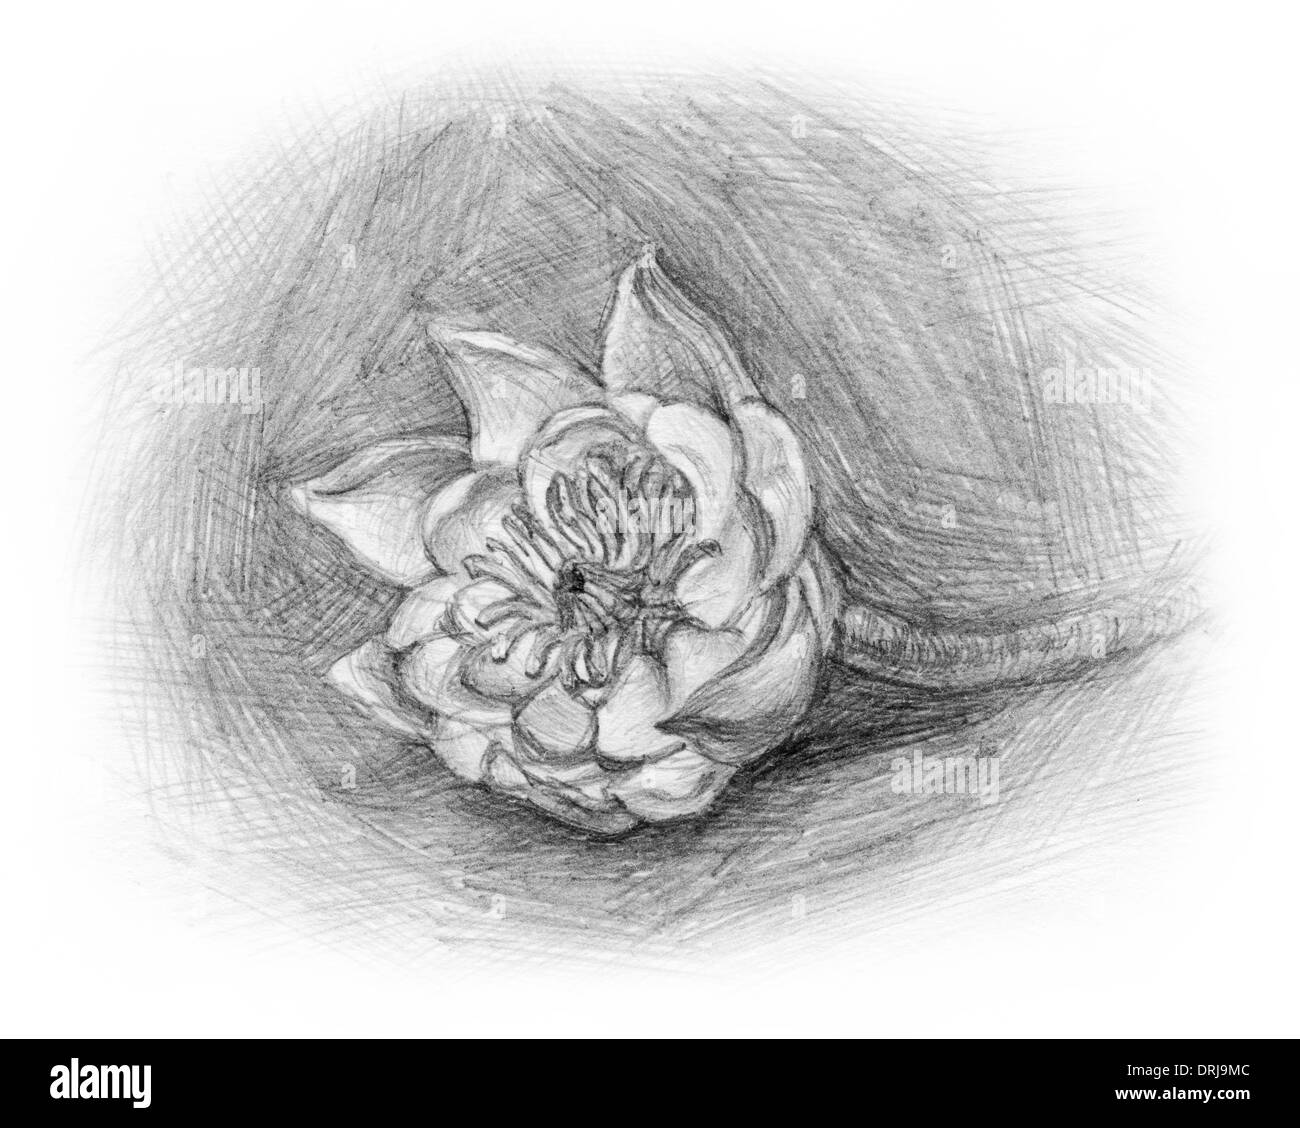 Waterlily (Latin Nymphaéa) - genus of aquatic plants in the family Nymphaeaceae (Nymphaeaceae),drawing, pencil Stock Photo